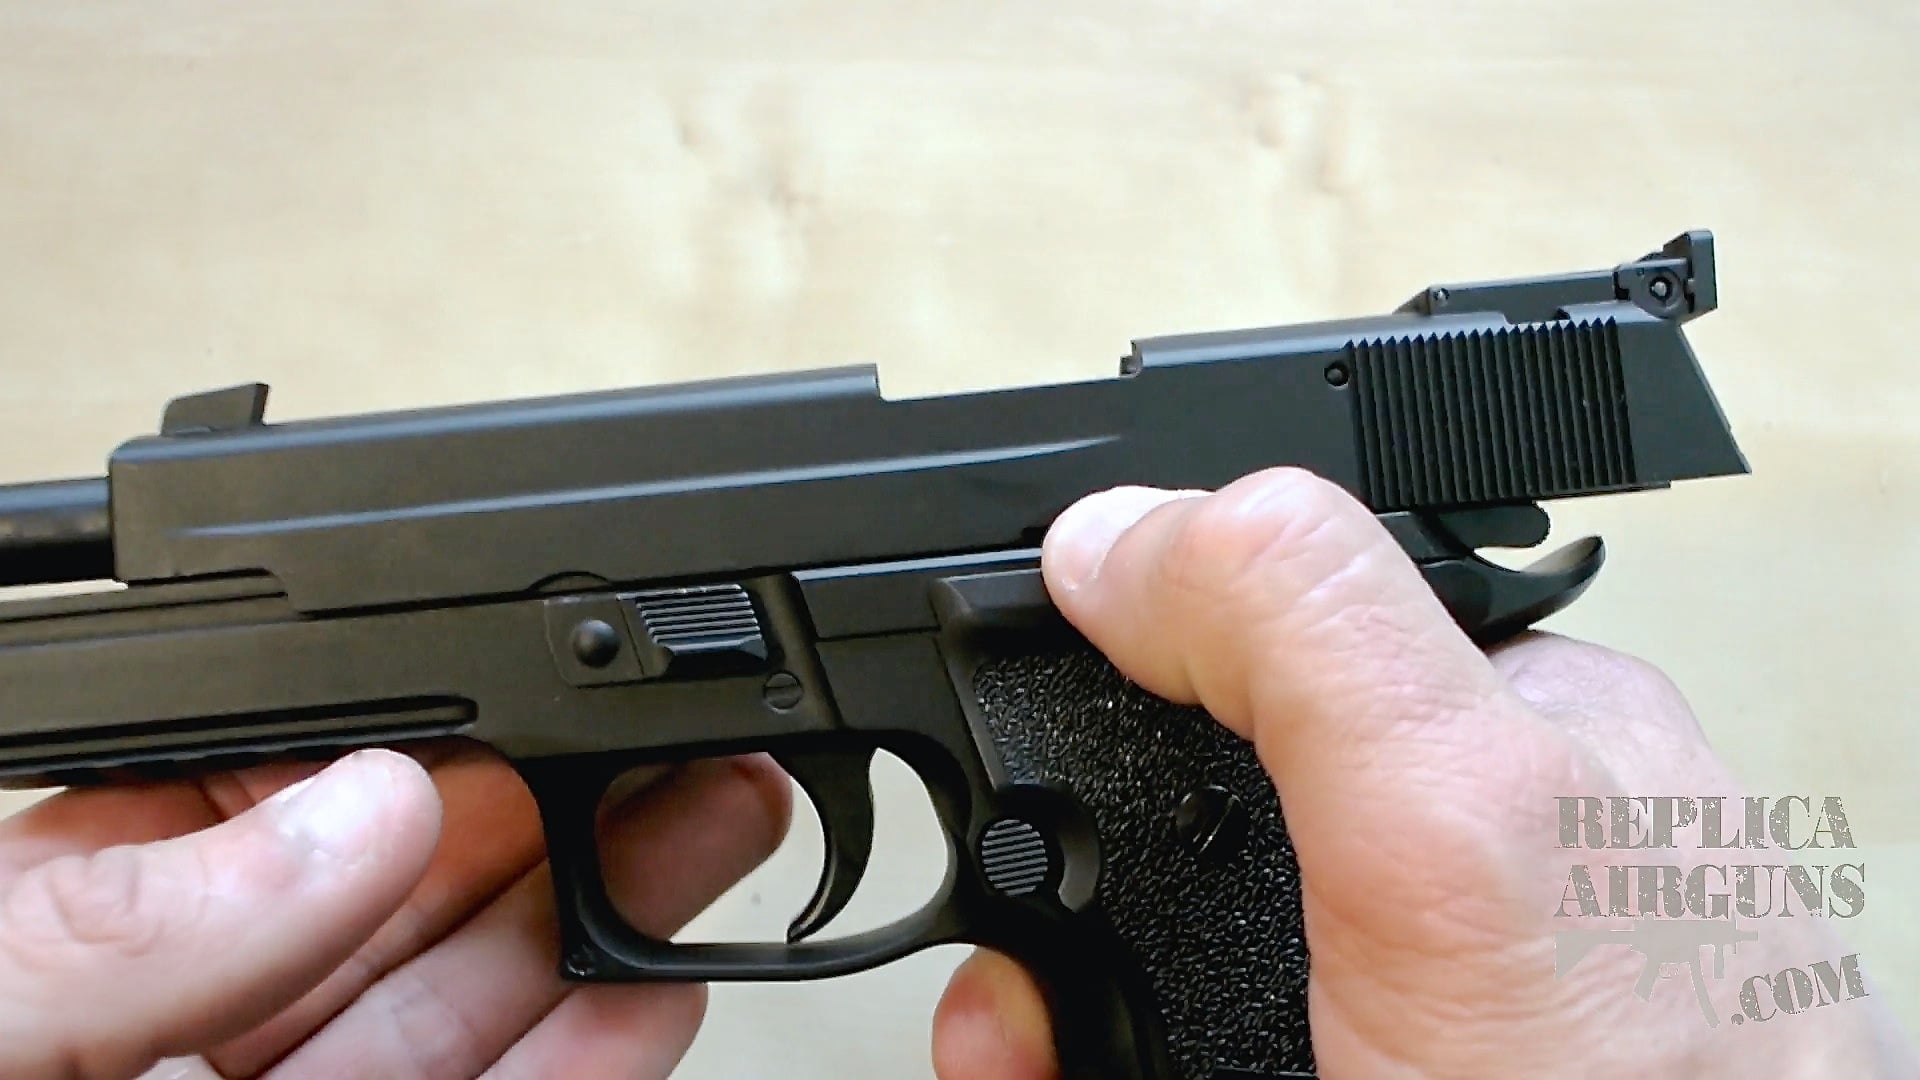 KWC Model 226-S5 Sig Sauer CO2 Blowback Airsoft Pistol Table Top Review